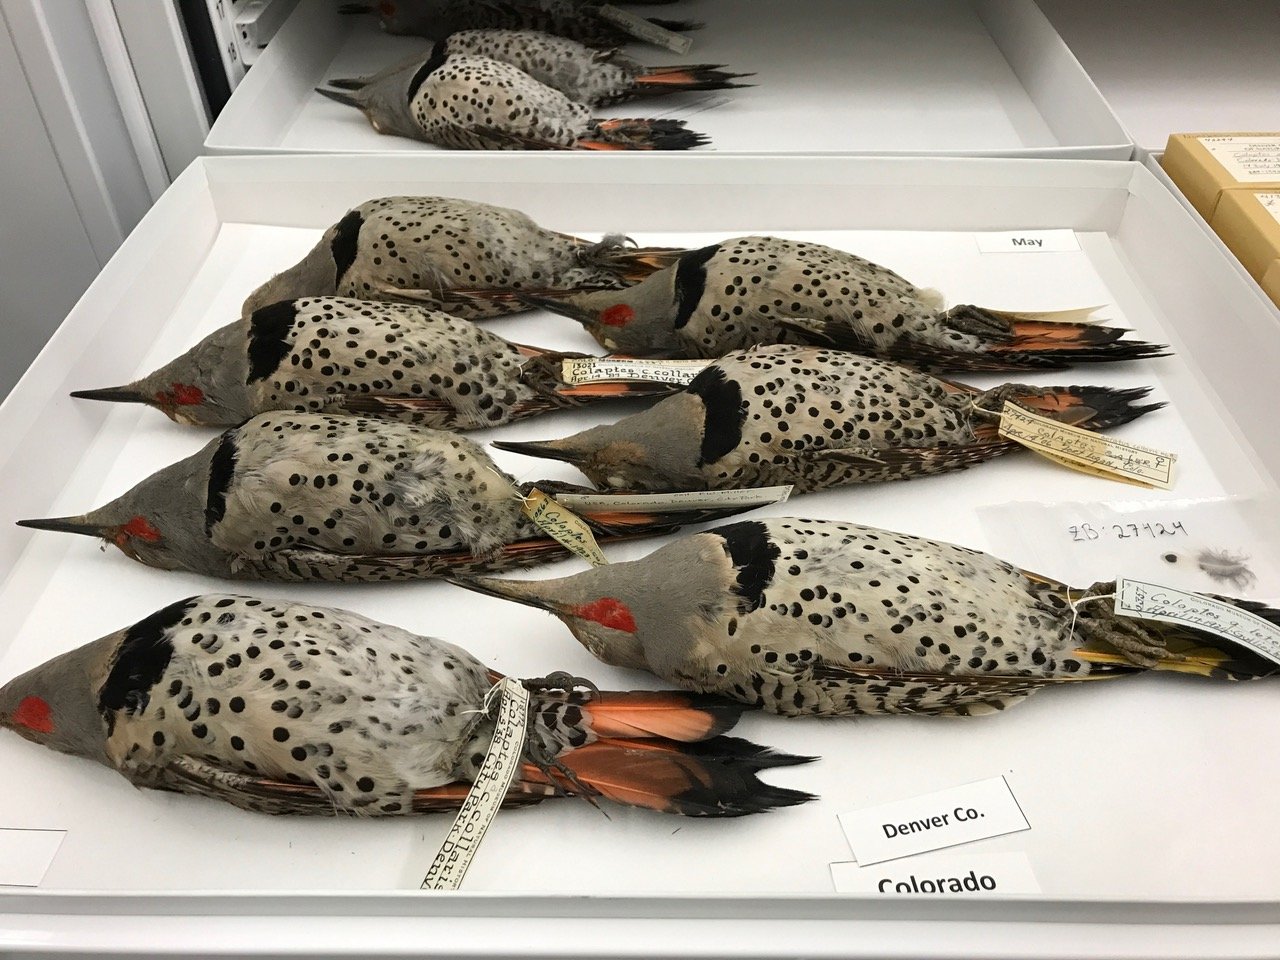  A tray of Northern Flickers showing hybridization between red-shafted (western) and yellow-shafted (eastern) varieties. Photo by Carron Meaney.  